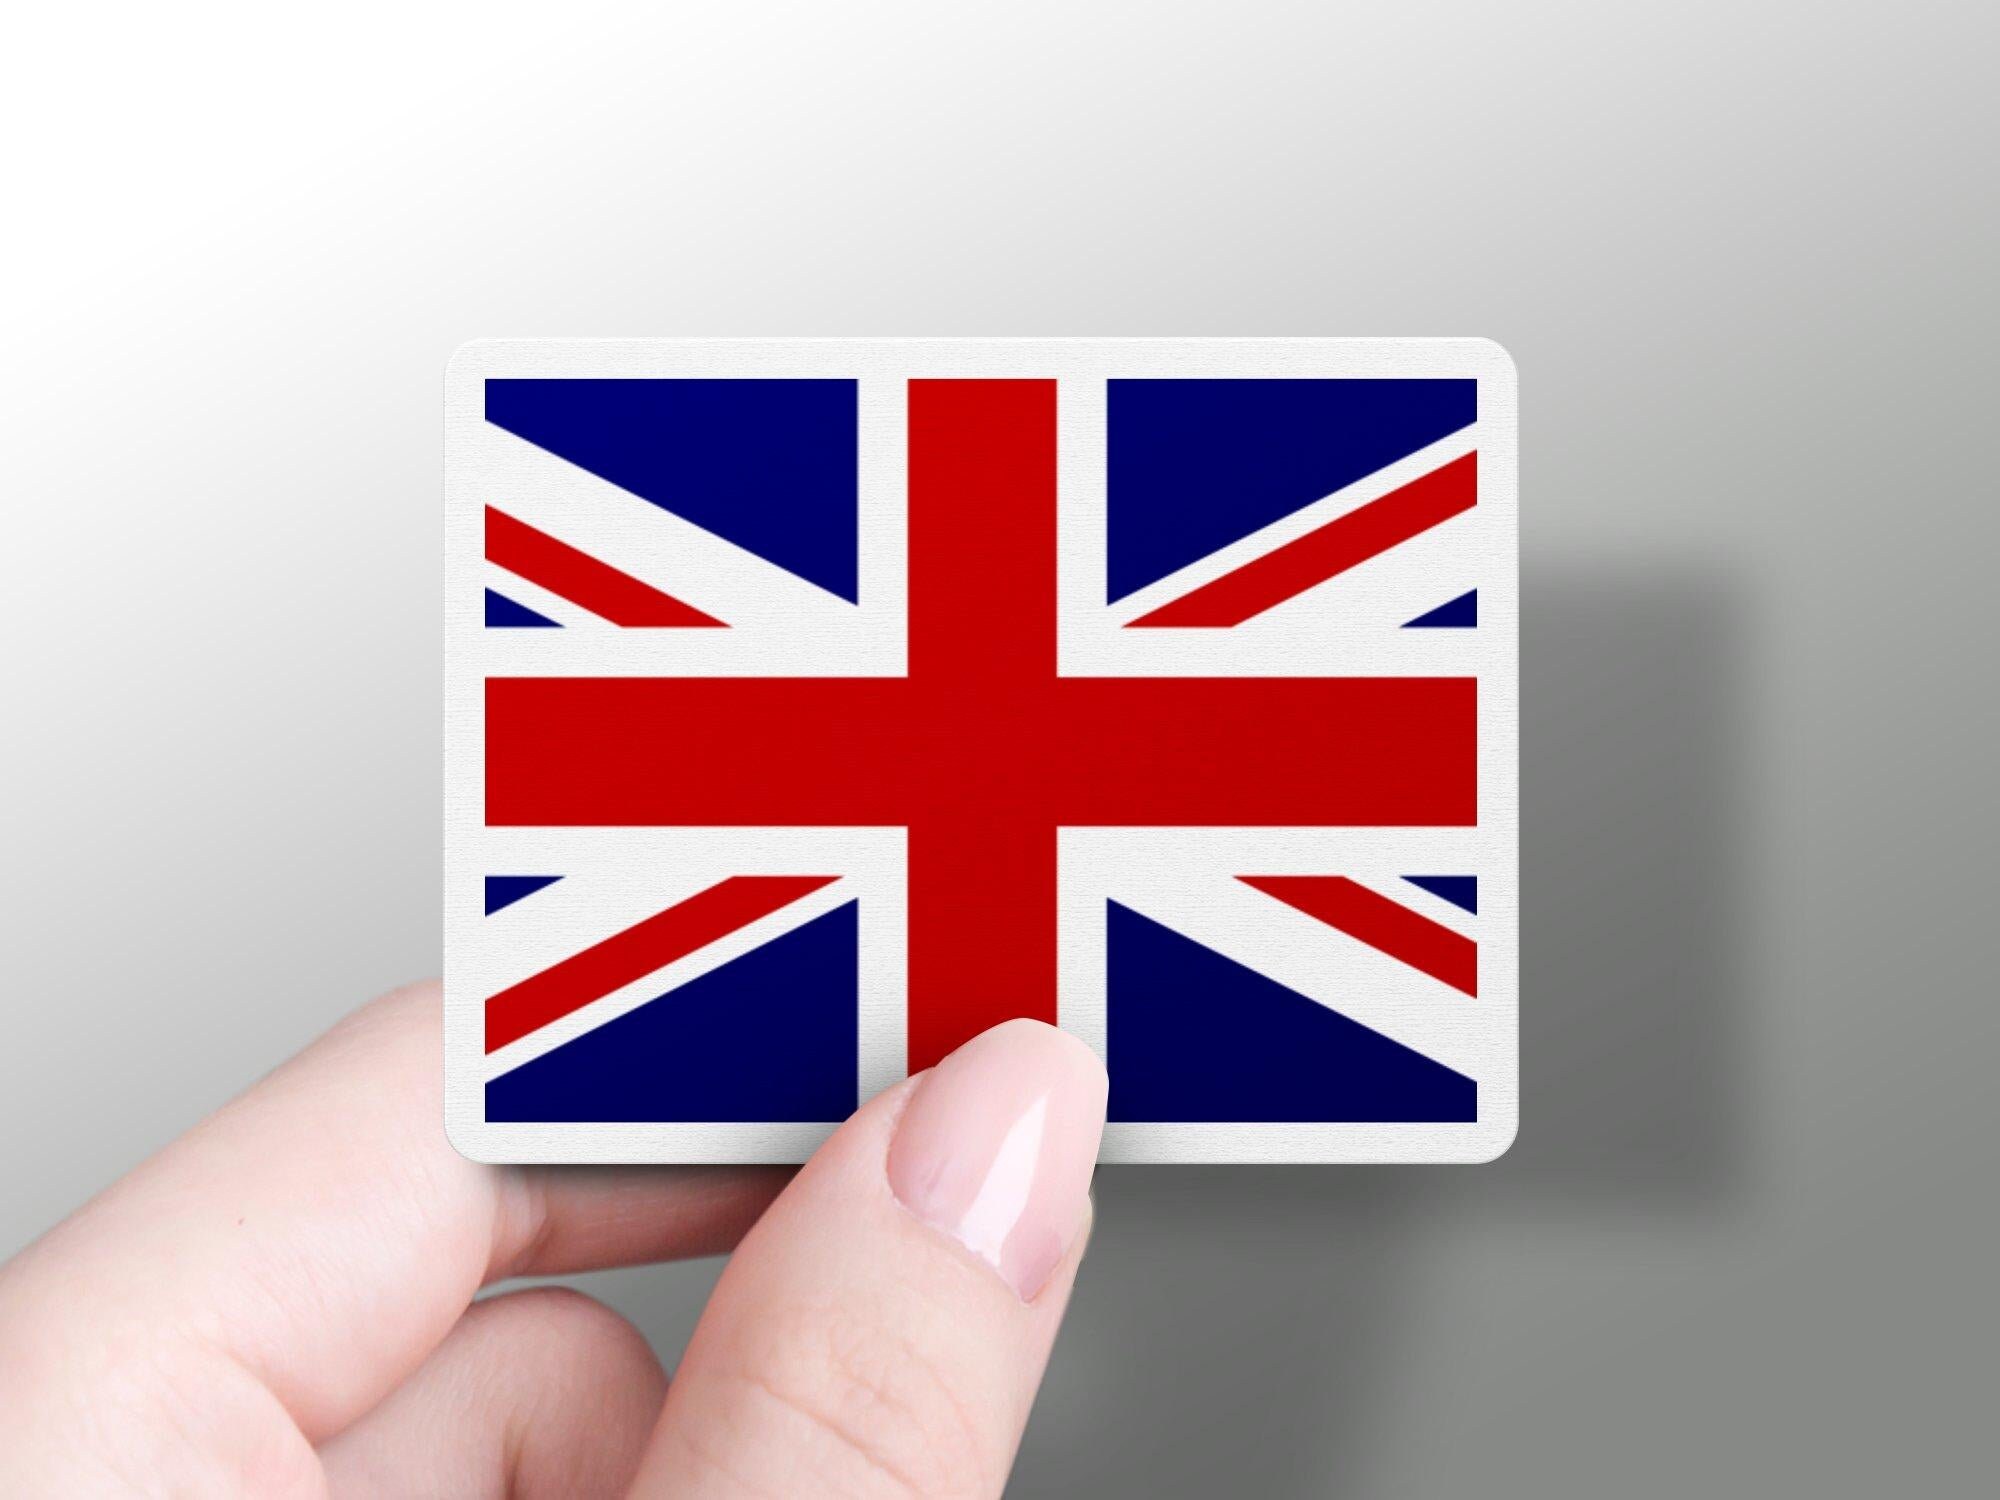 Red Blue Union Jack UK Flag 3D Steering Wheel Decal Sticker For 2014 2